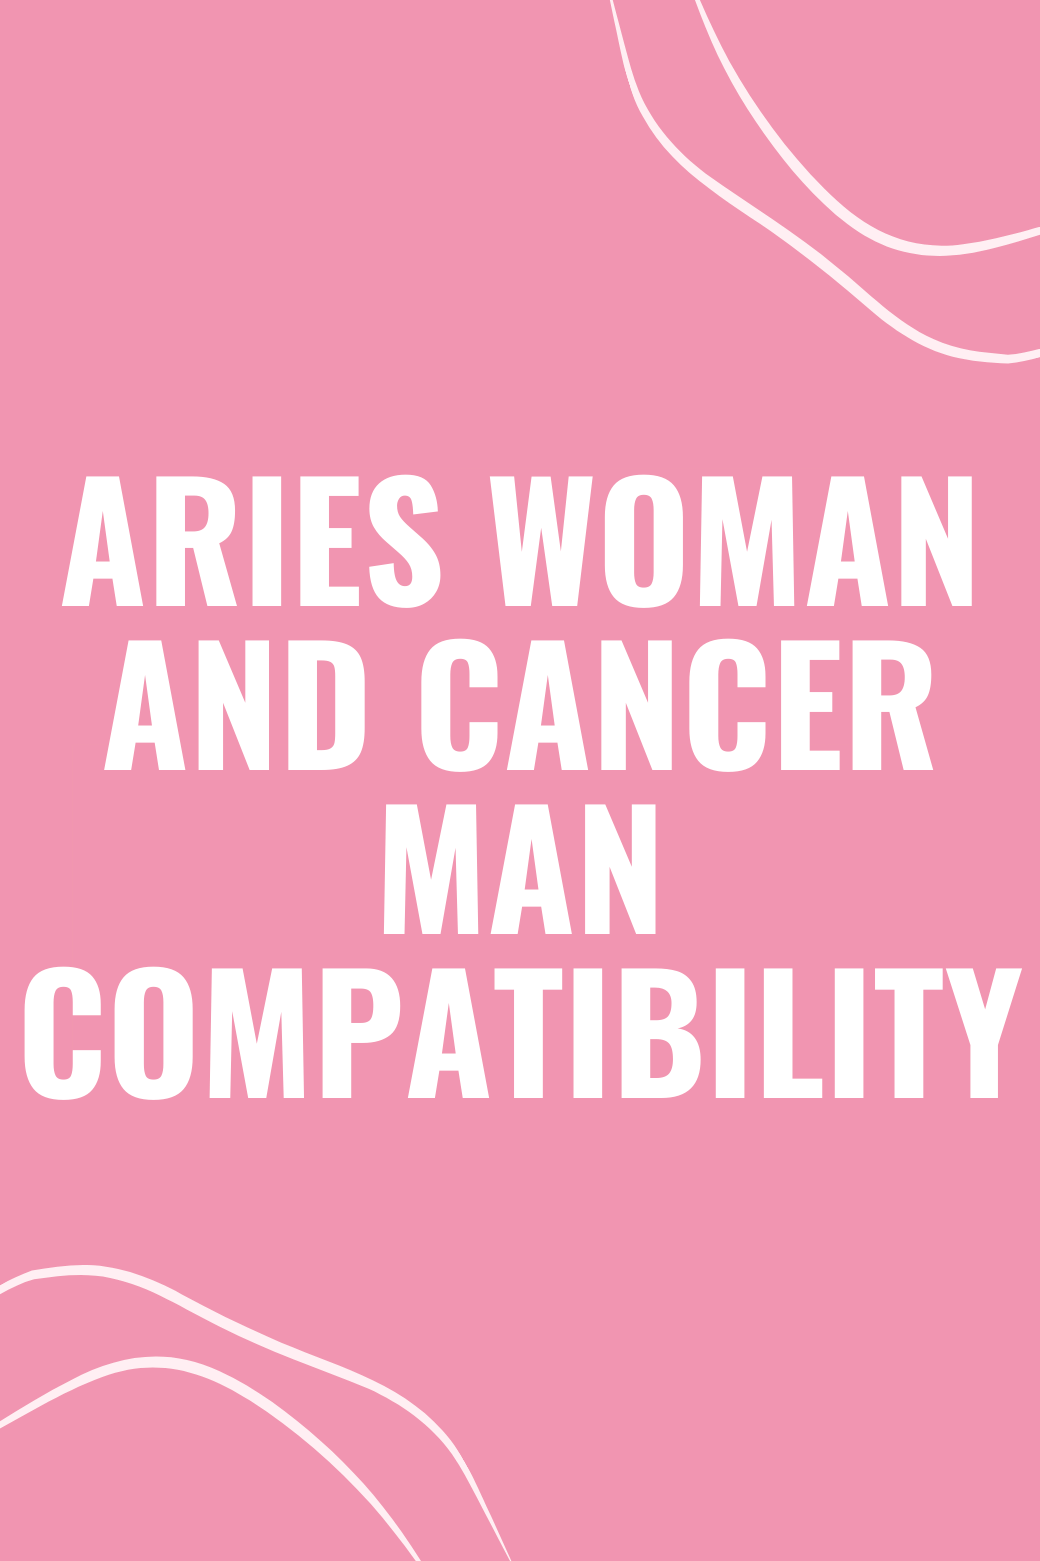 Aries Woman and Cancer Man Compatibility